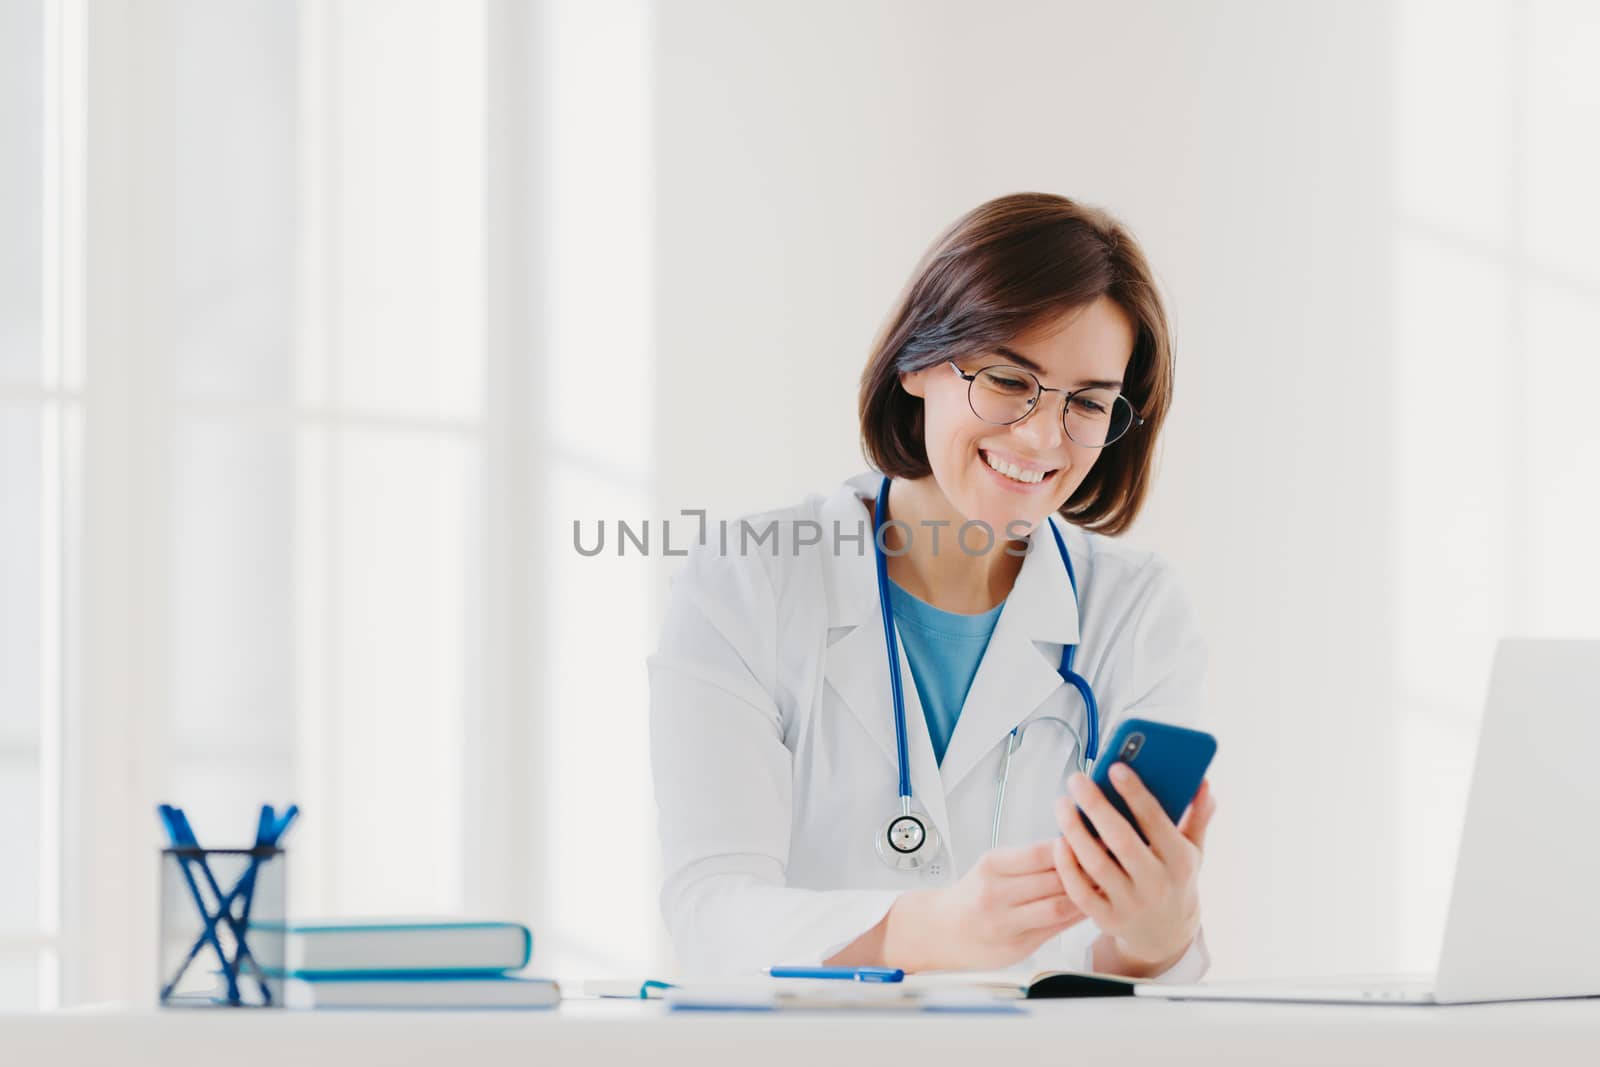 Positive female medical worker involved in chatting, holds mobile phone and sends messages, wears medical gown, has friendly cheerful expression, poses at desktop gives online consultation for patient by vkstock